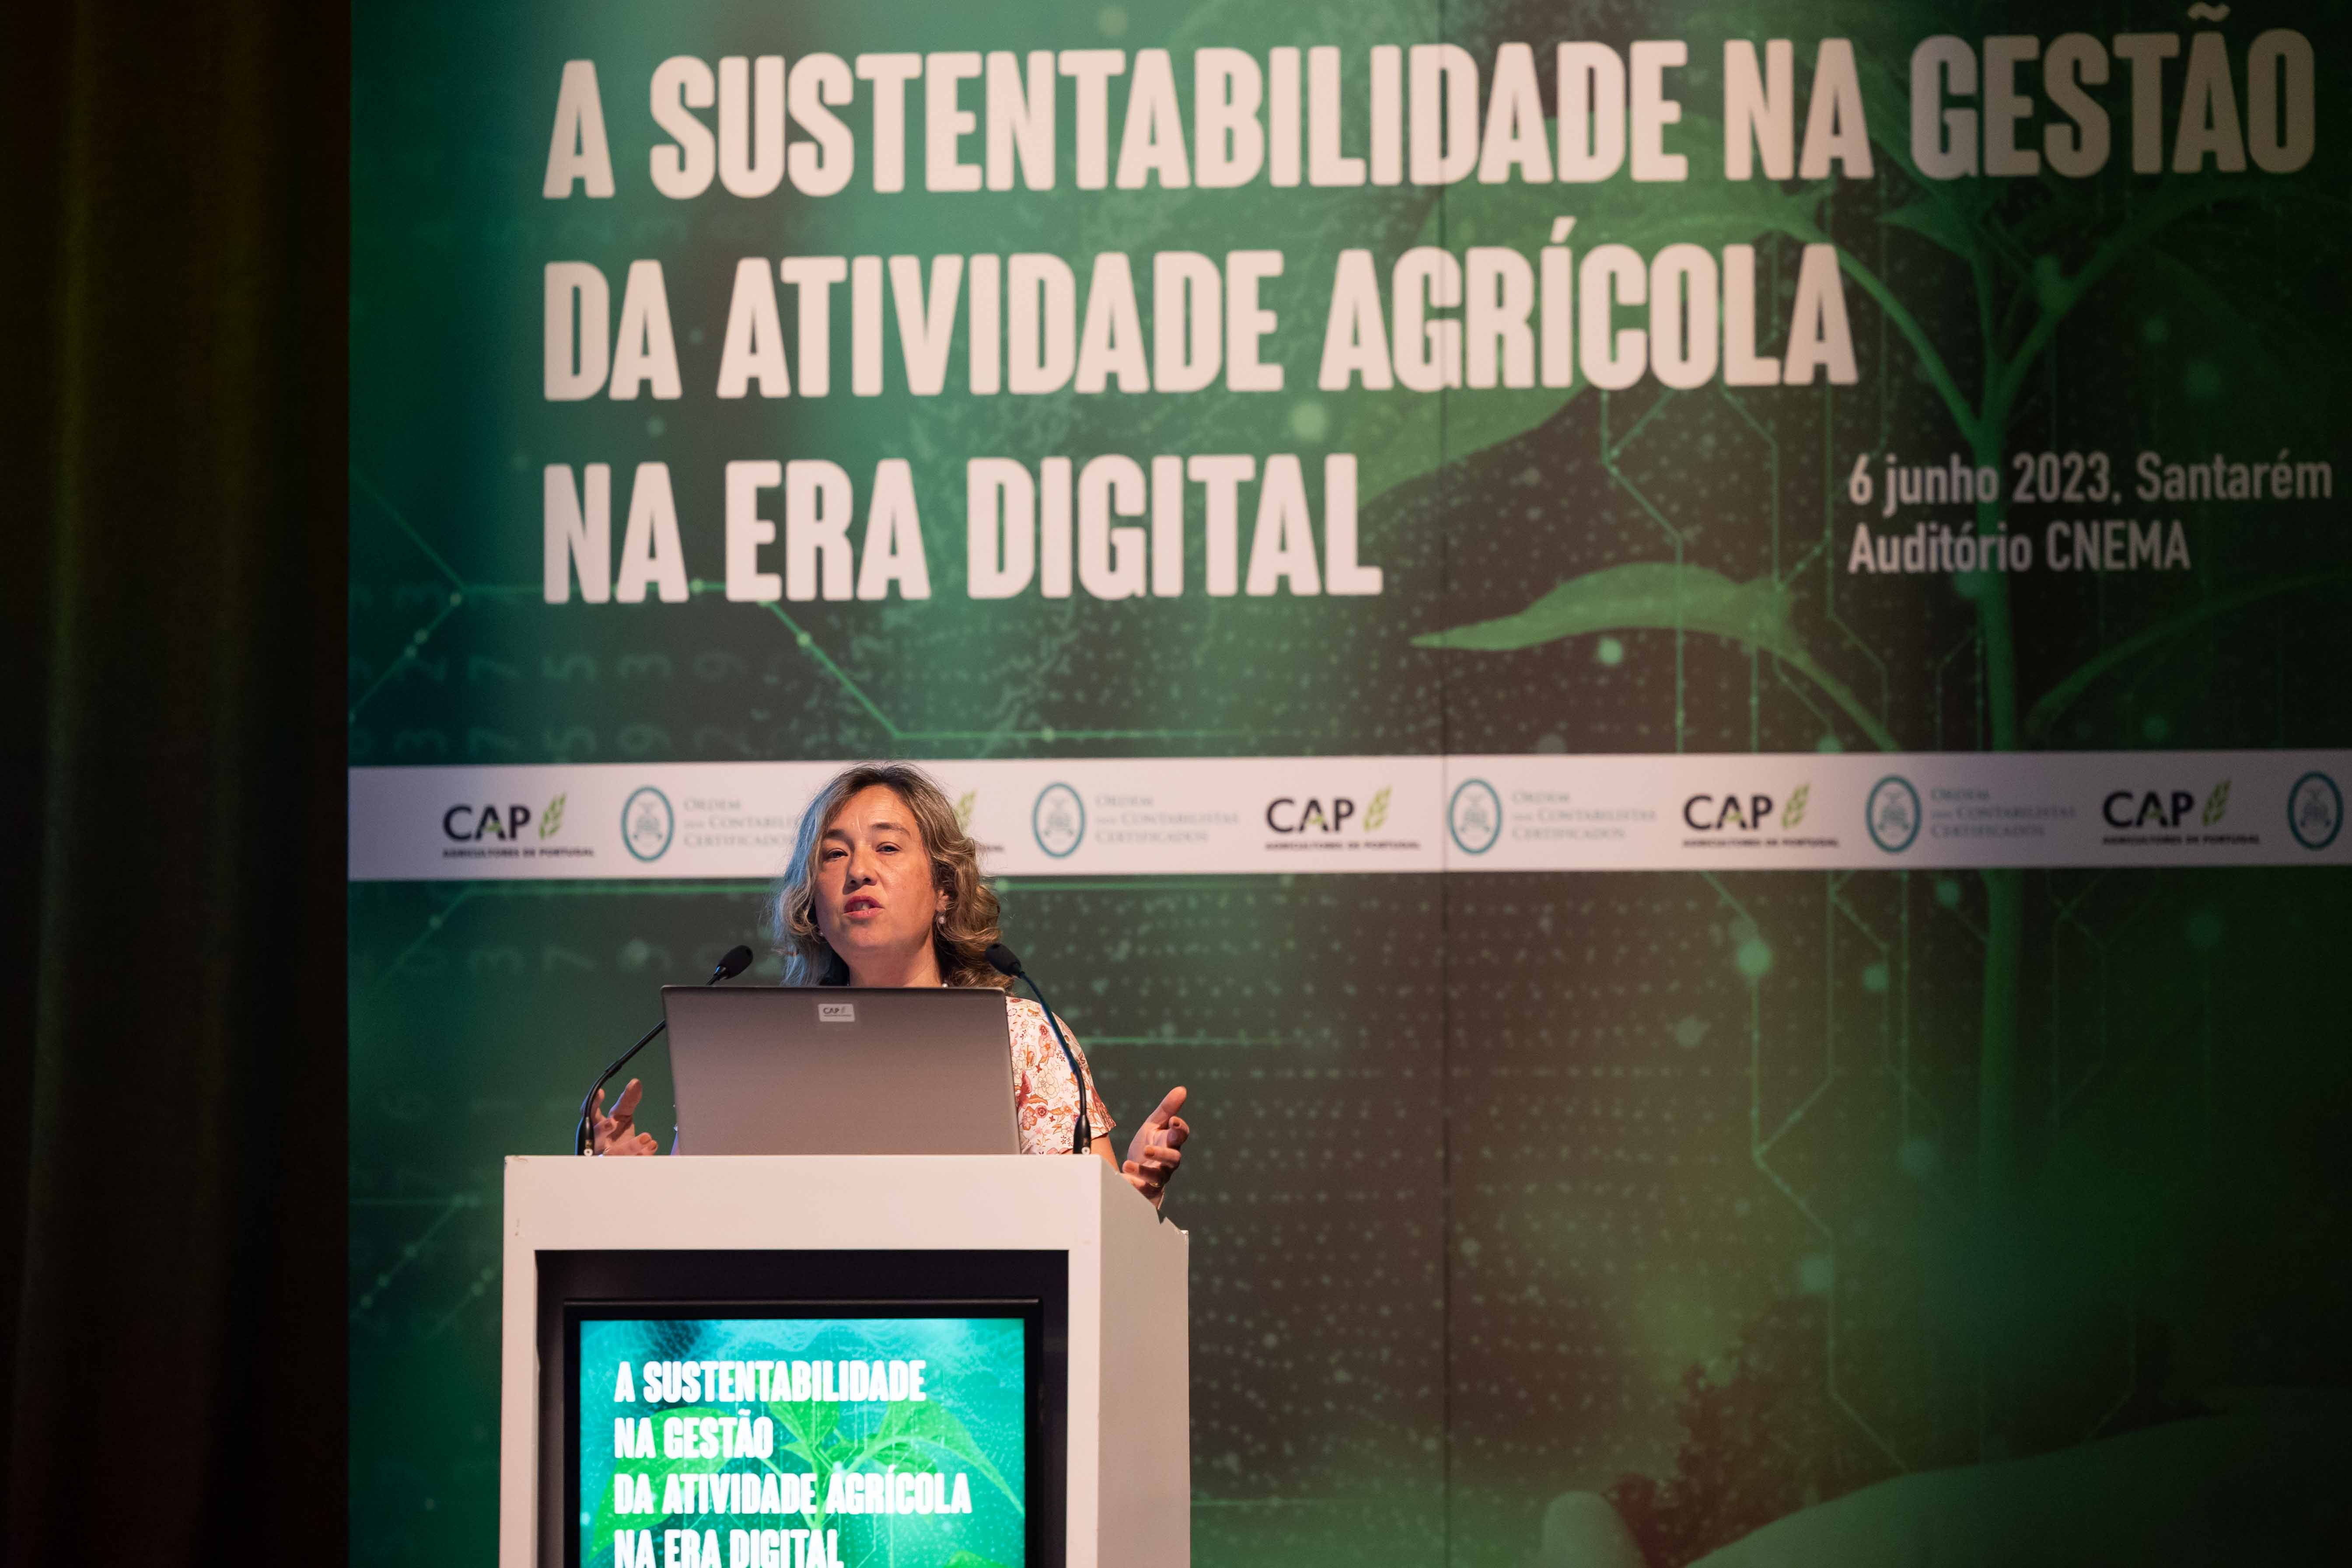 Sustainability in the Management of Agricultural Activity in the Digital Era